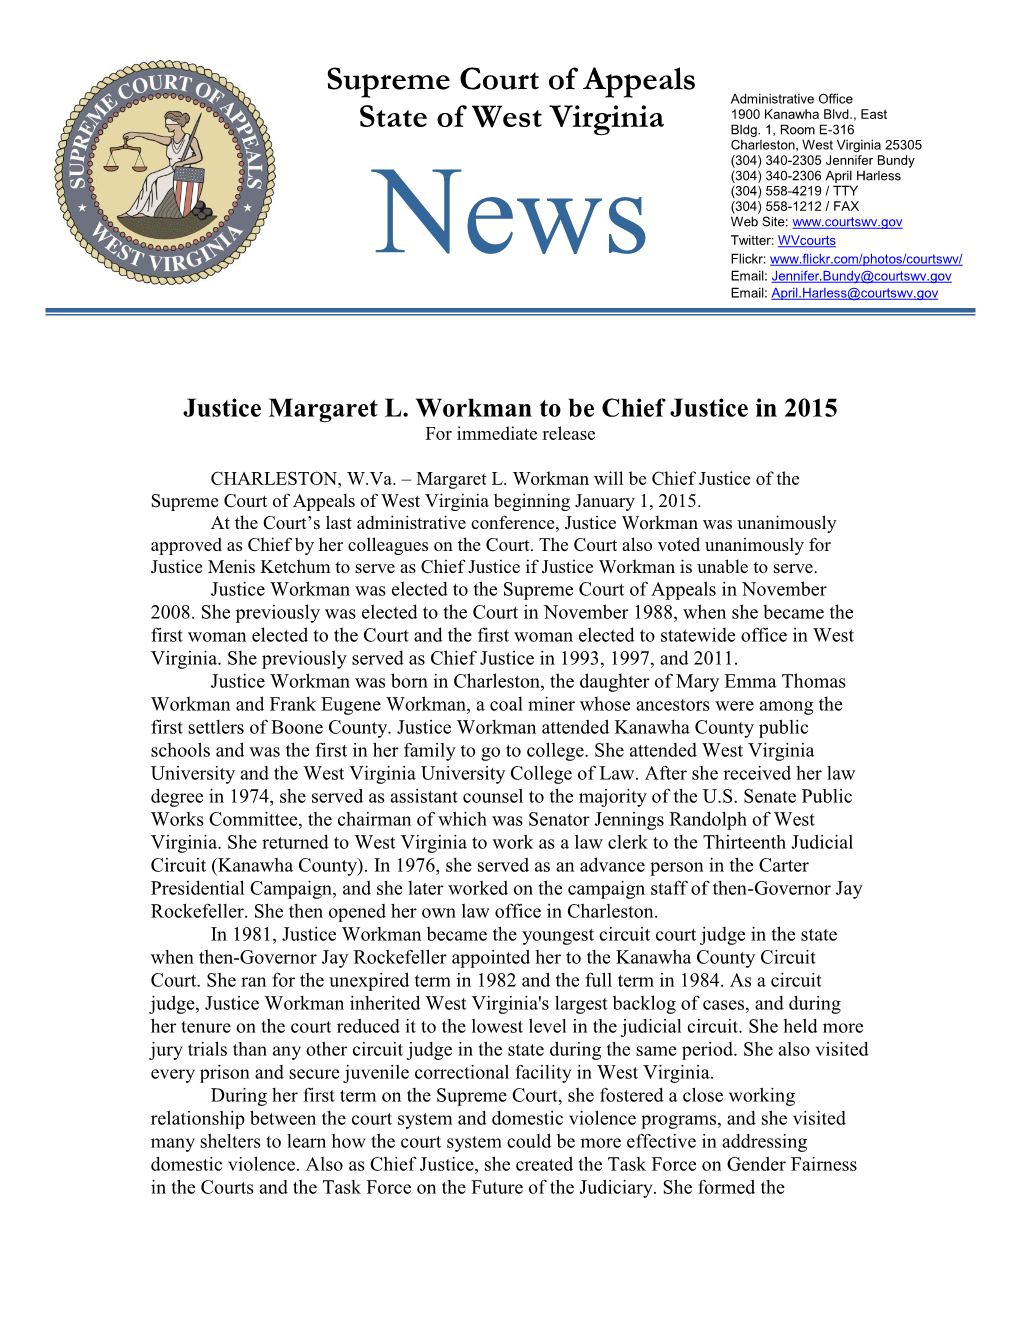 Margaret Workman to Be Chief Justice in 2015